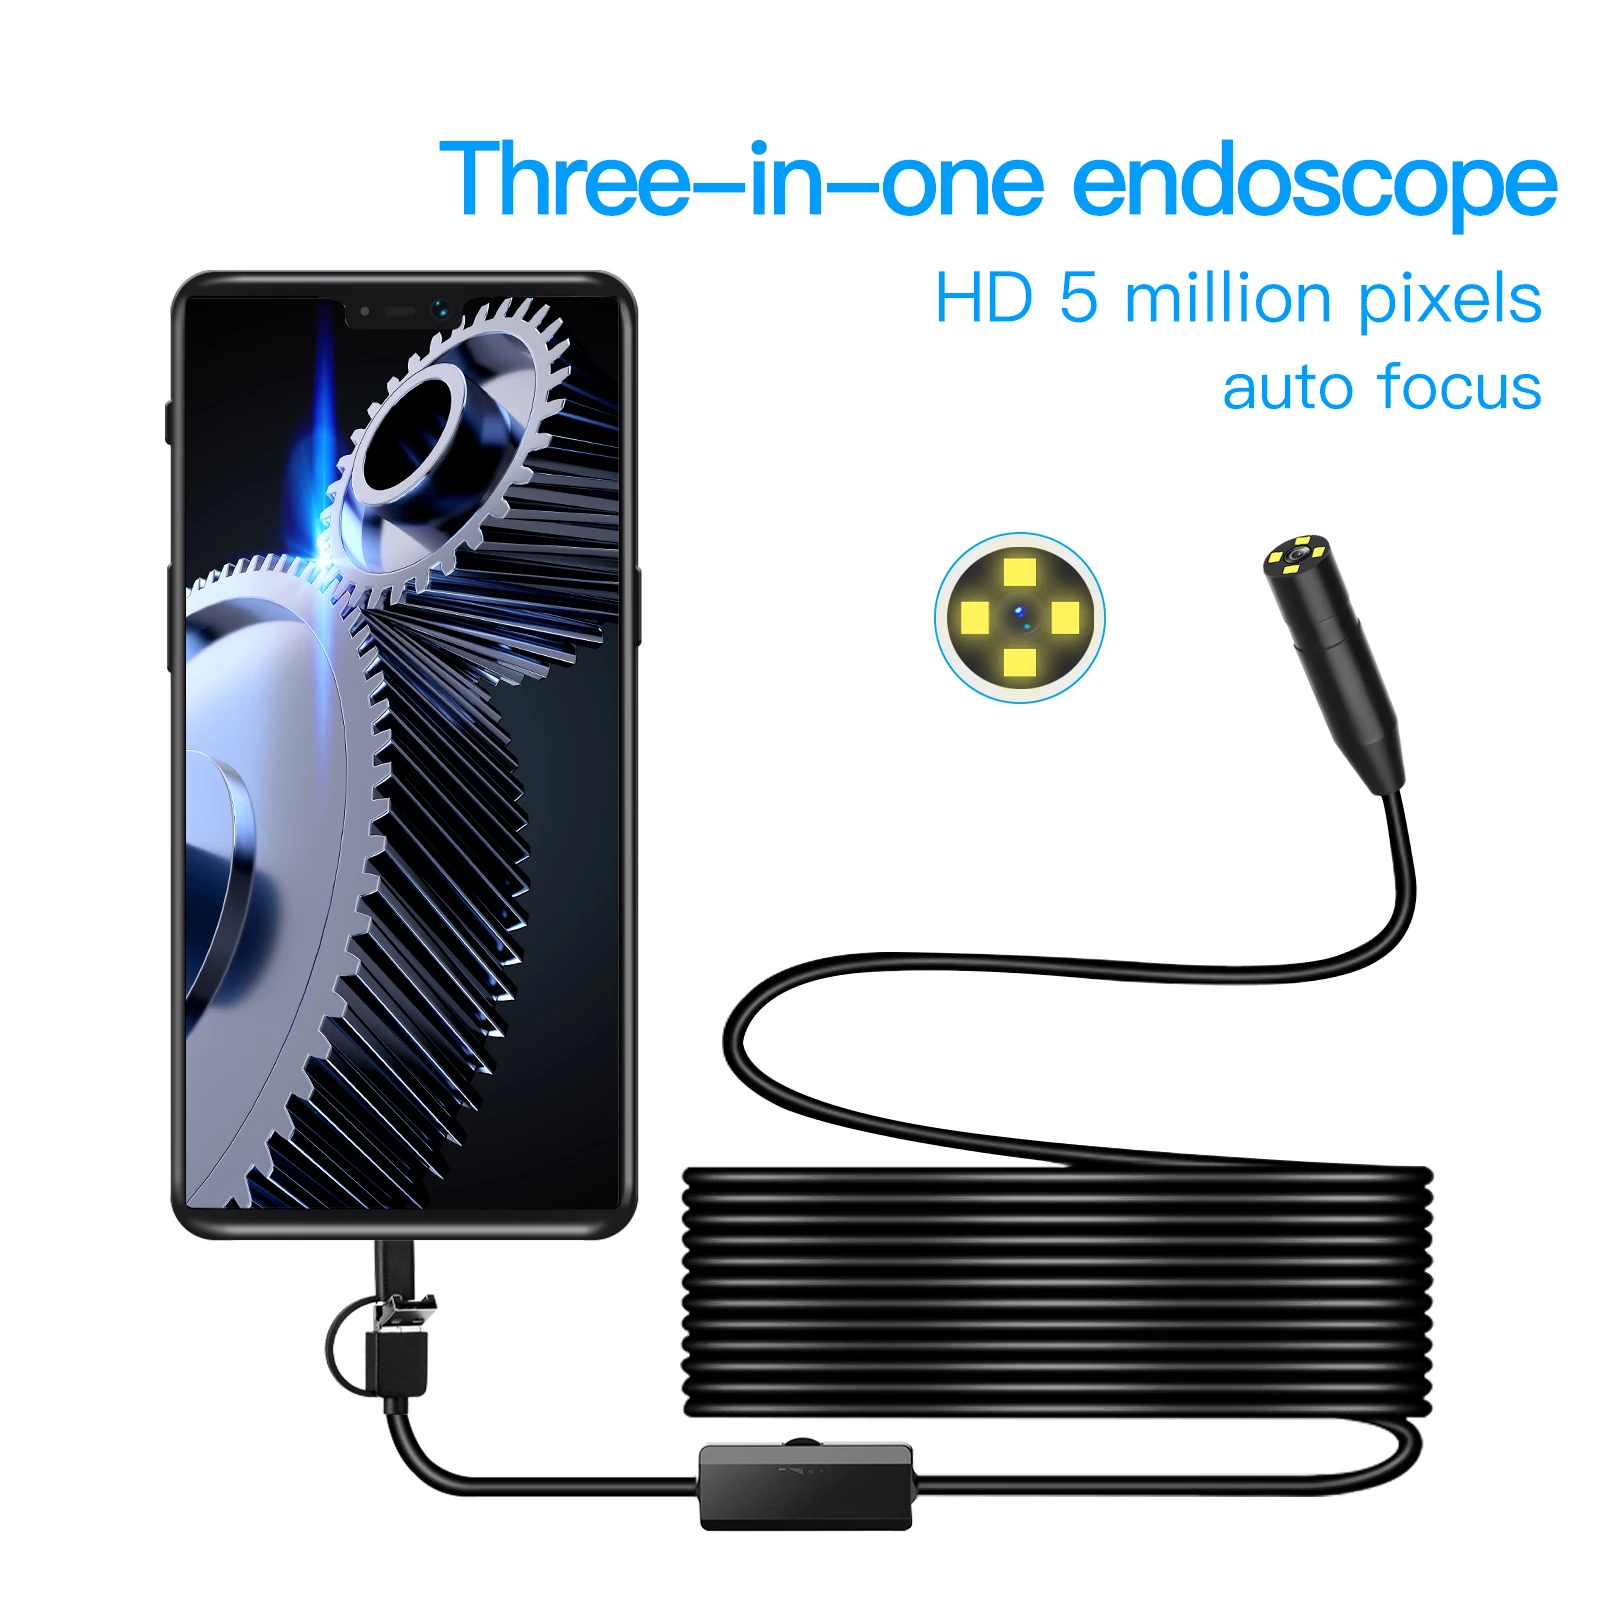 Details about   USB Endoscope Borescope Inspection Camera Tube HD For Android Mobile Phone 20m 